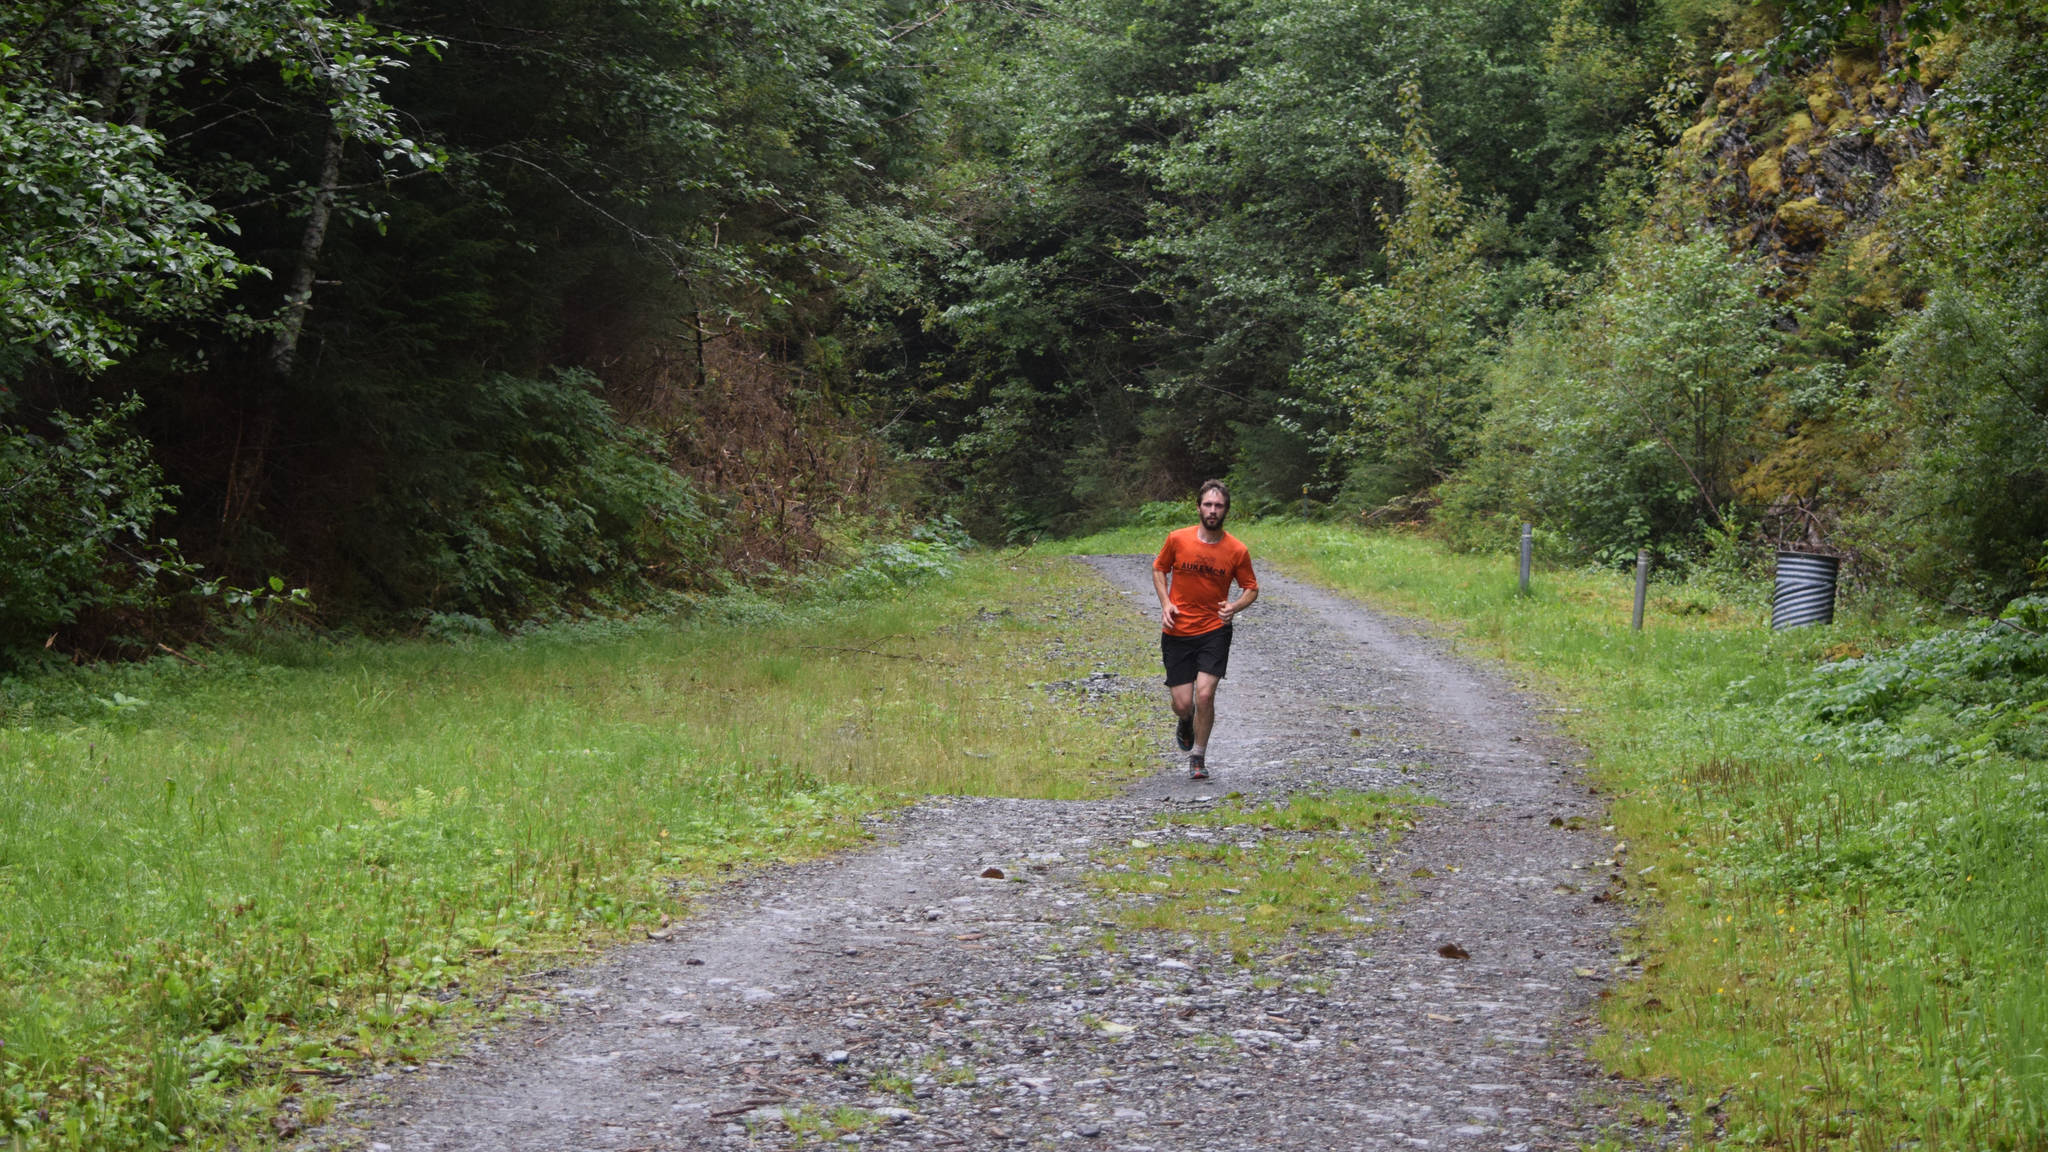 Matt Callahan runs up Salmon Creek trail during Saturday’s Nifty Fifty race. Callahan was one of 19 runners to brave the 50-kilometer course that ascended Perseverance, Mt. Robert’s and Salmon Creek trails back-to-back-back. (Nolin Ainsworth | Juneau Empire)